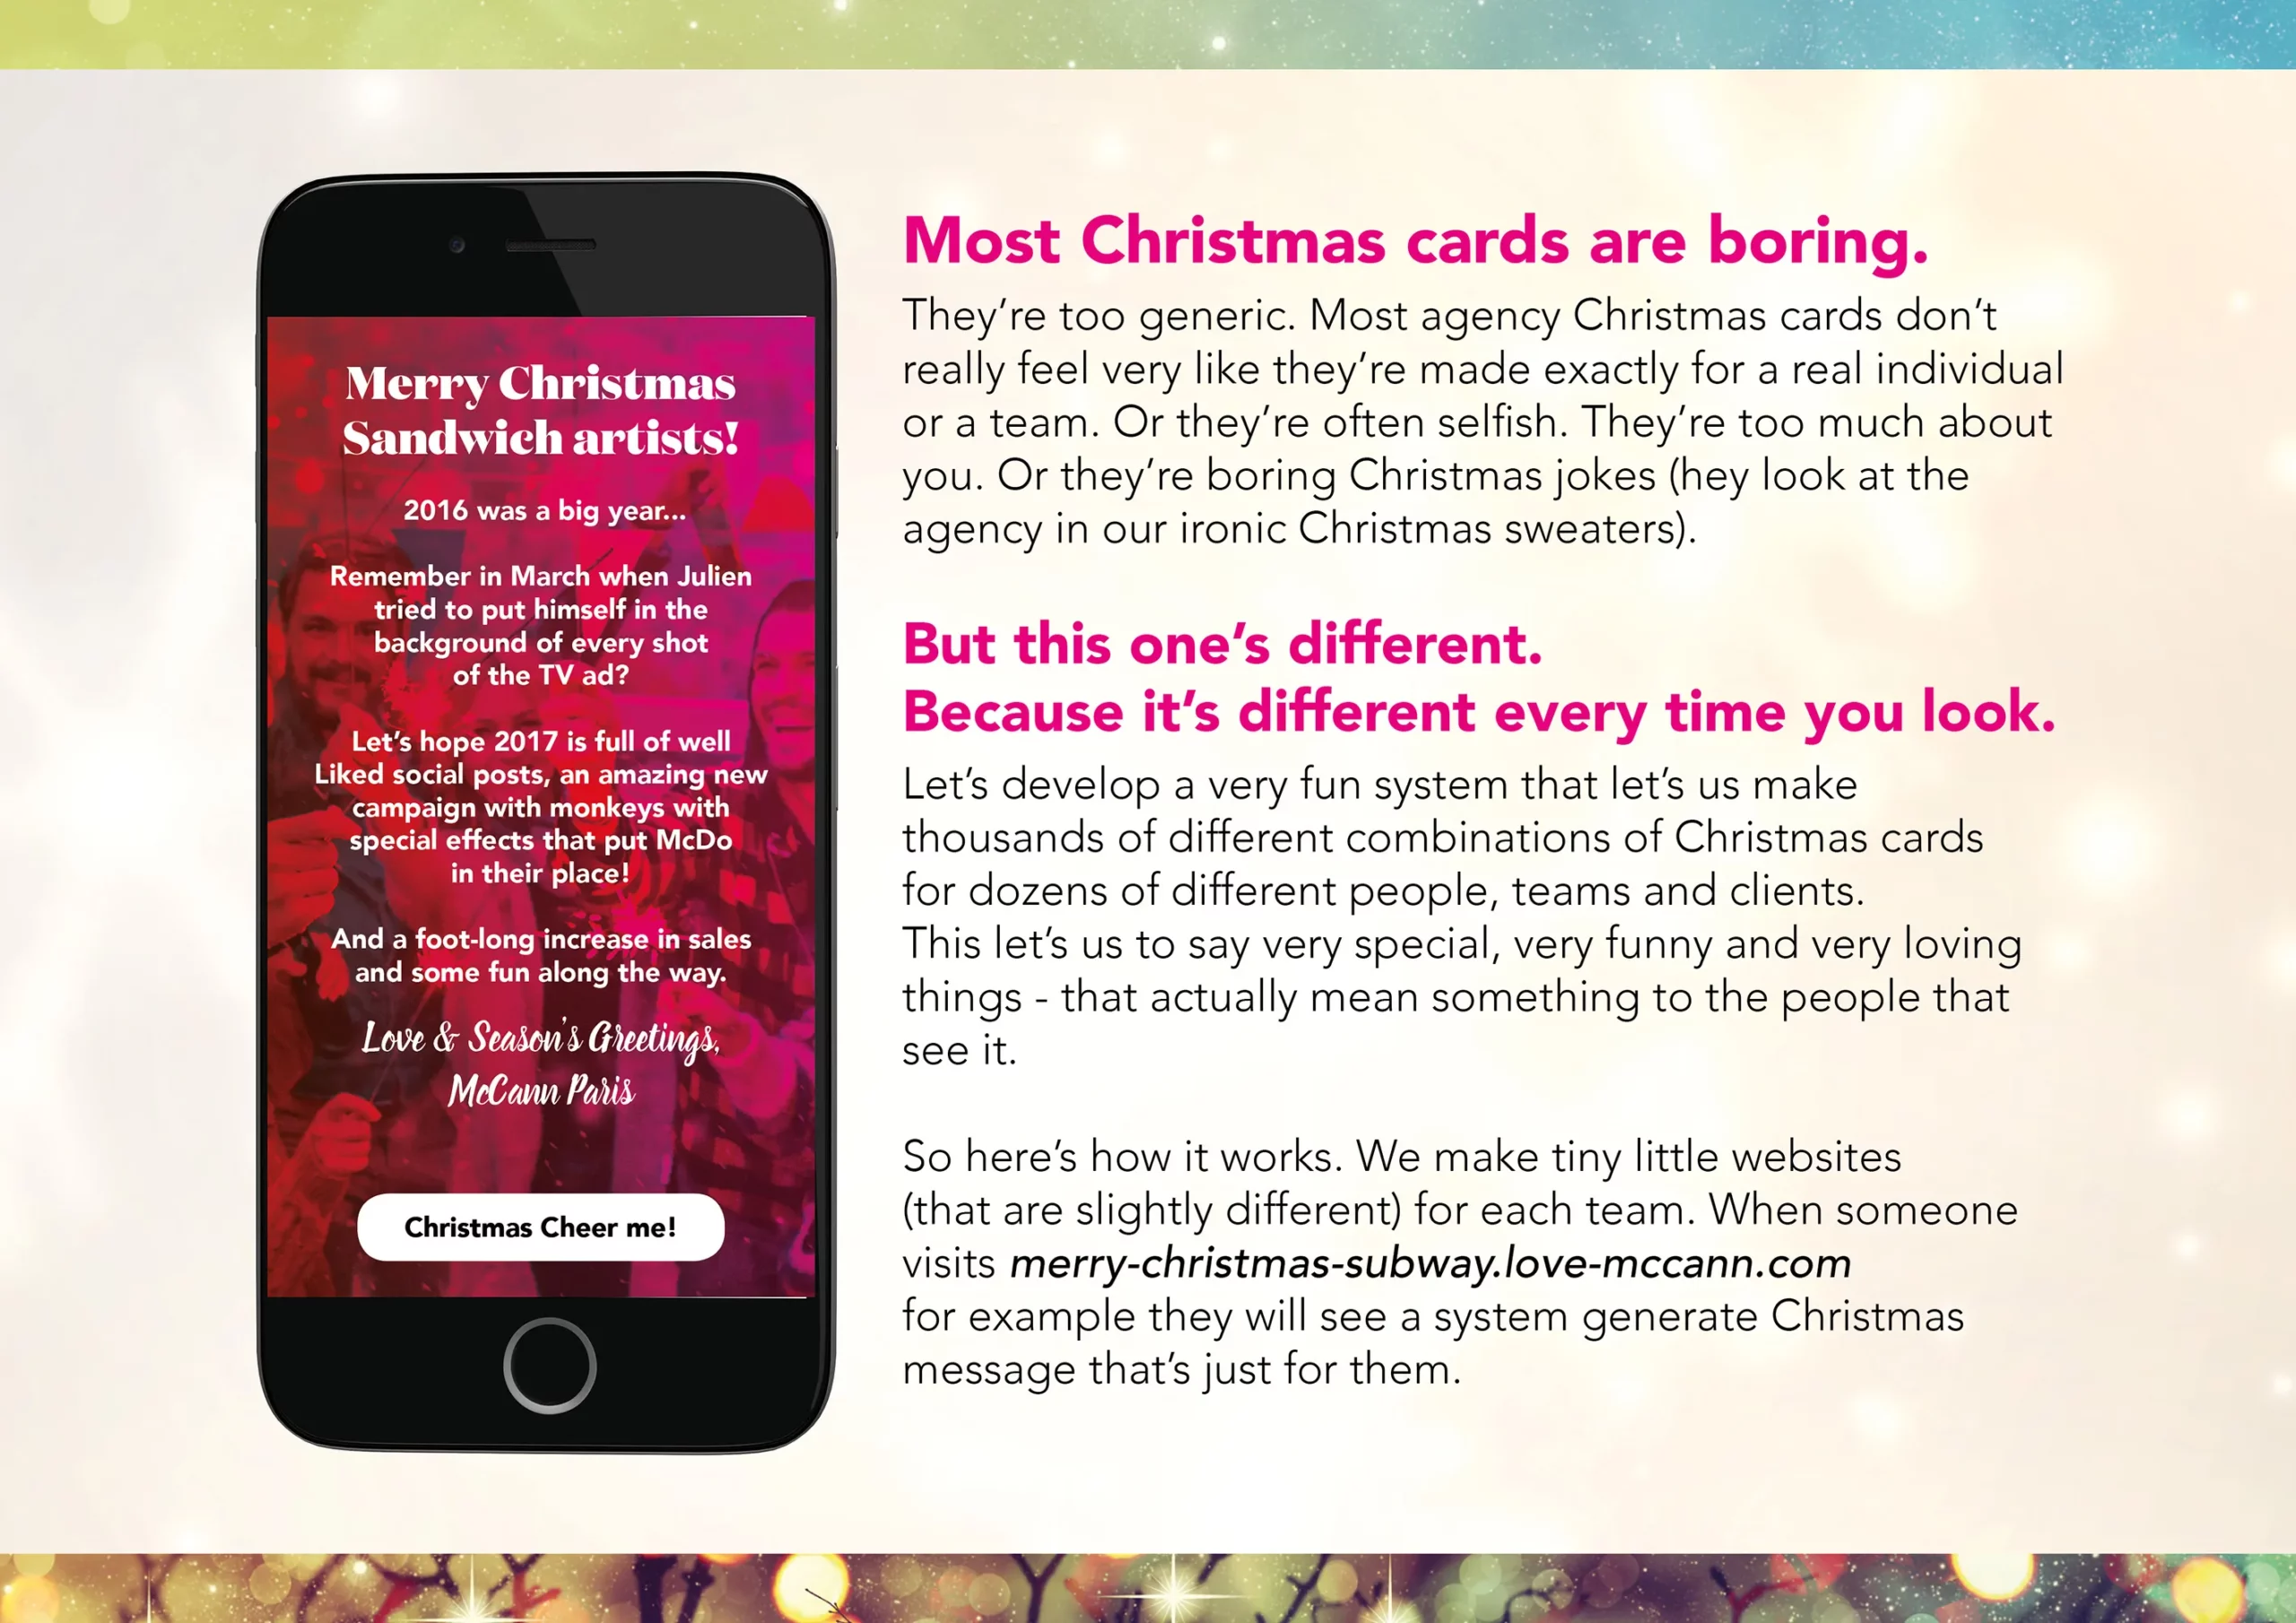 A creative concept for Christmas cards from McCann Paris that uses AI to generate greetings